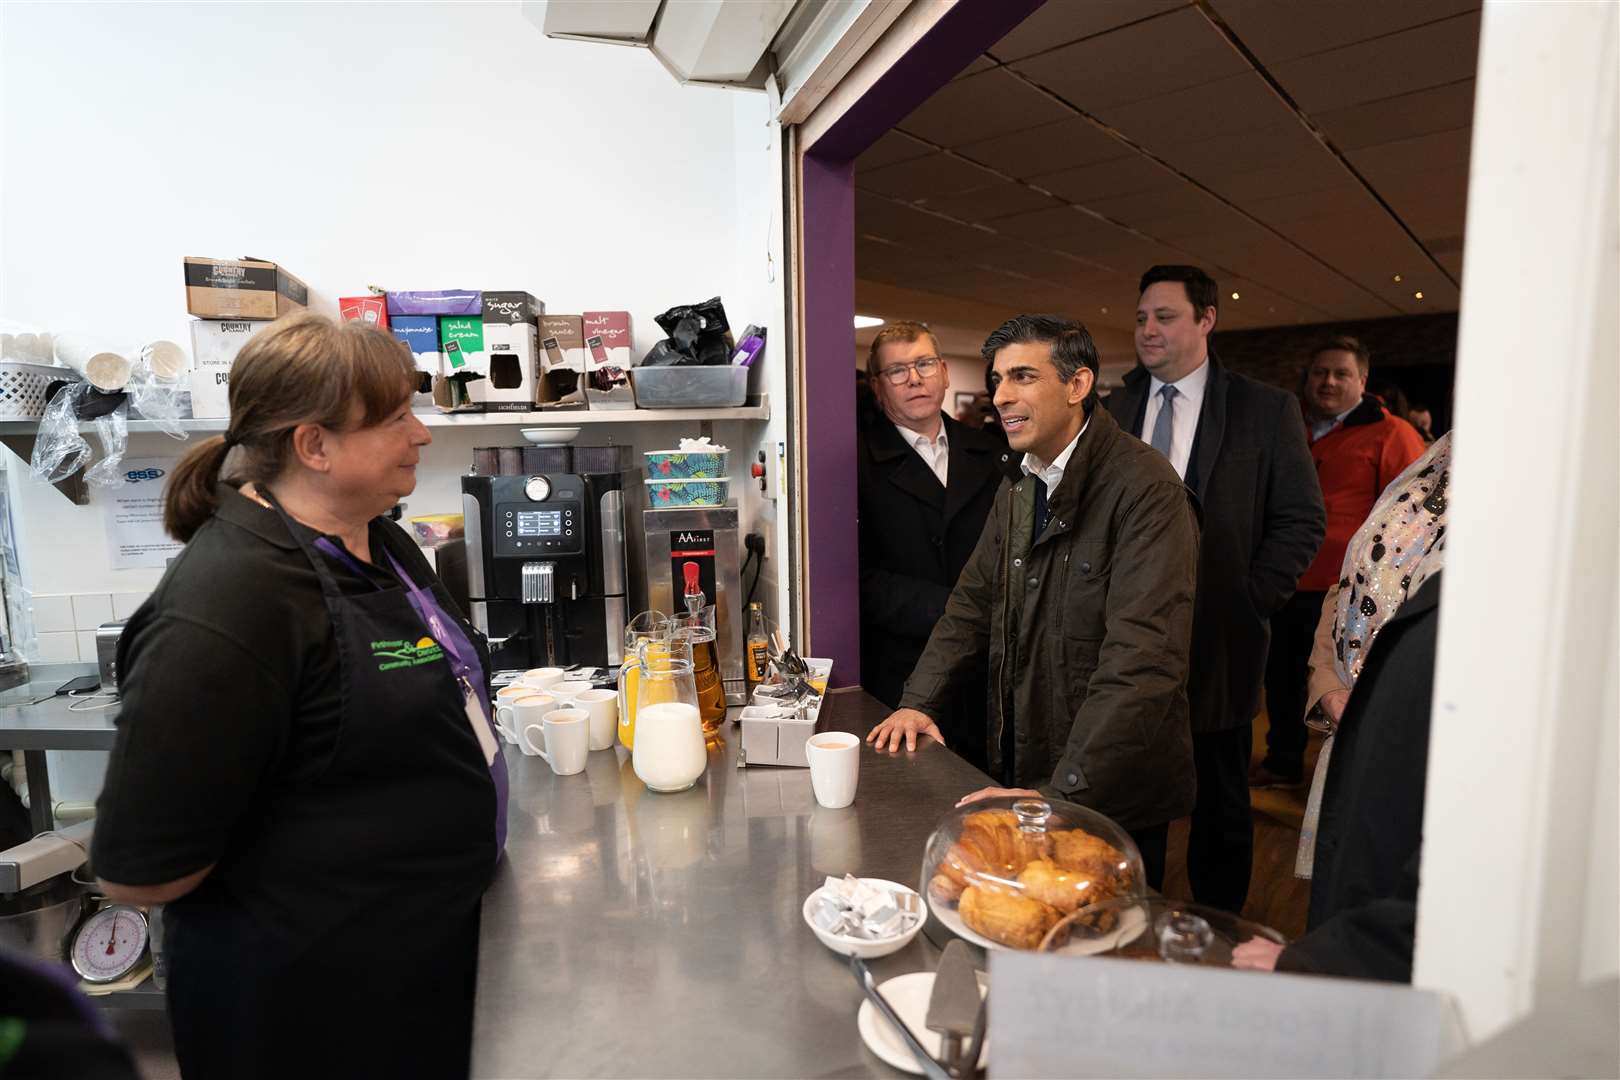 Prime Minister Rishi Sunak meets staff and local party members at Firthmoor Community Centre during a visit to Darlington, County Durham (Stefan Rousseau/PA)